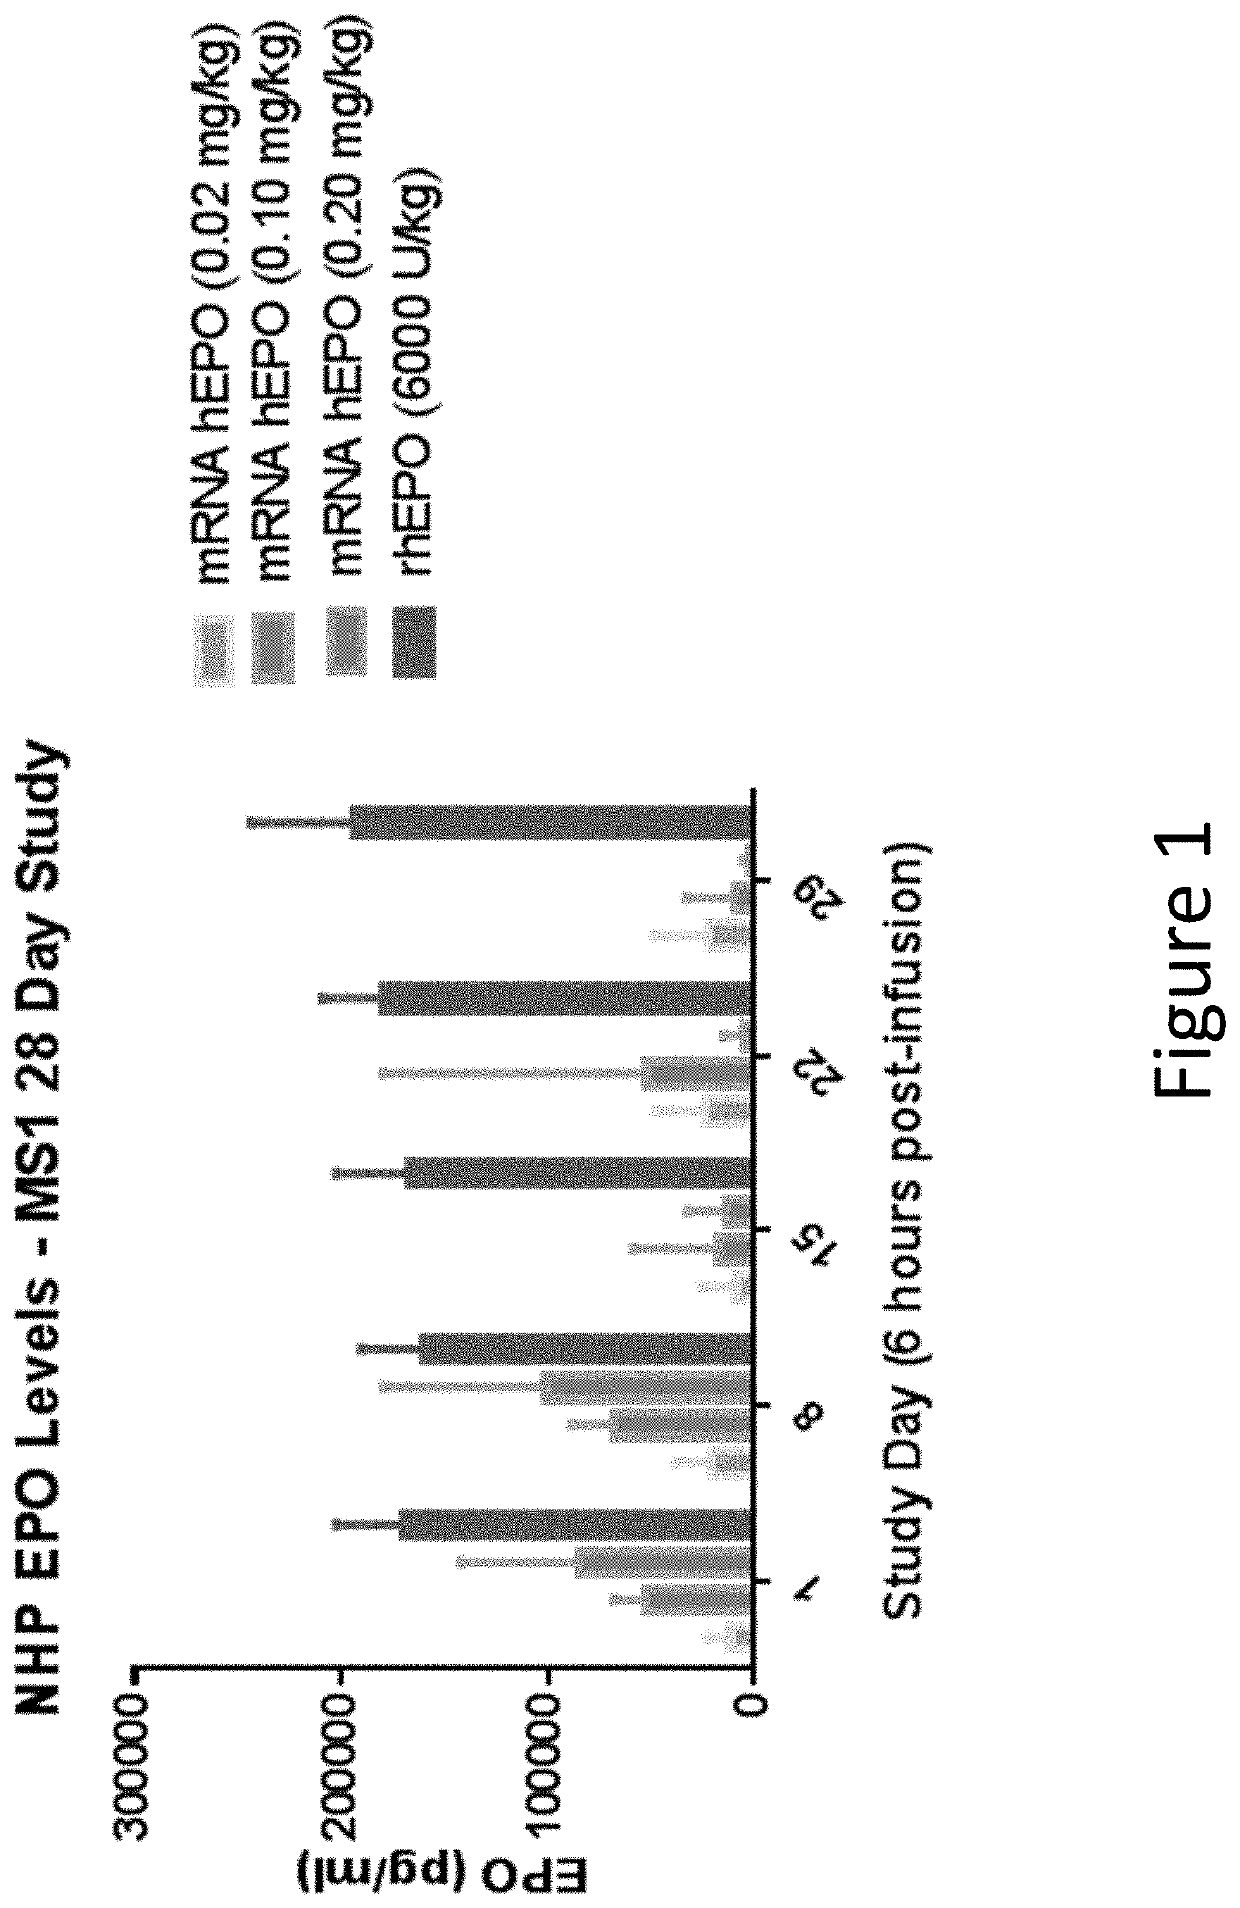 Methods for therapeutic administration of messenger ribonucleic acid drugs